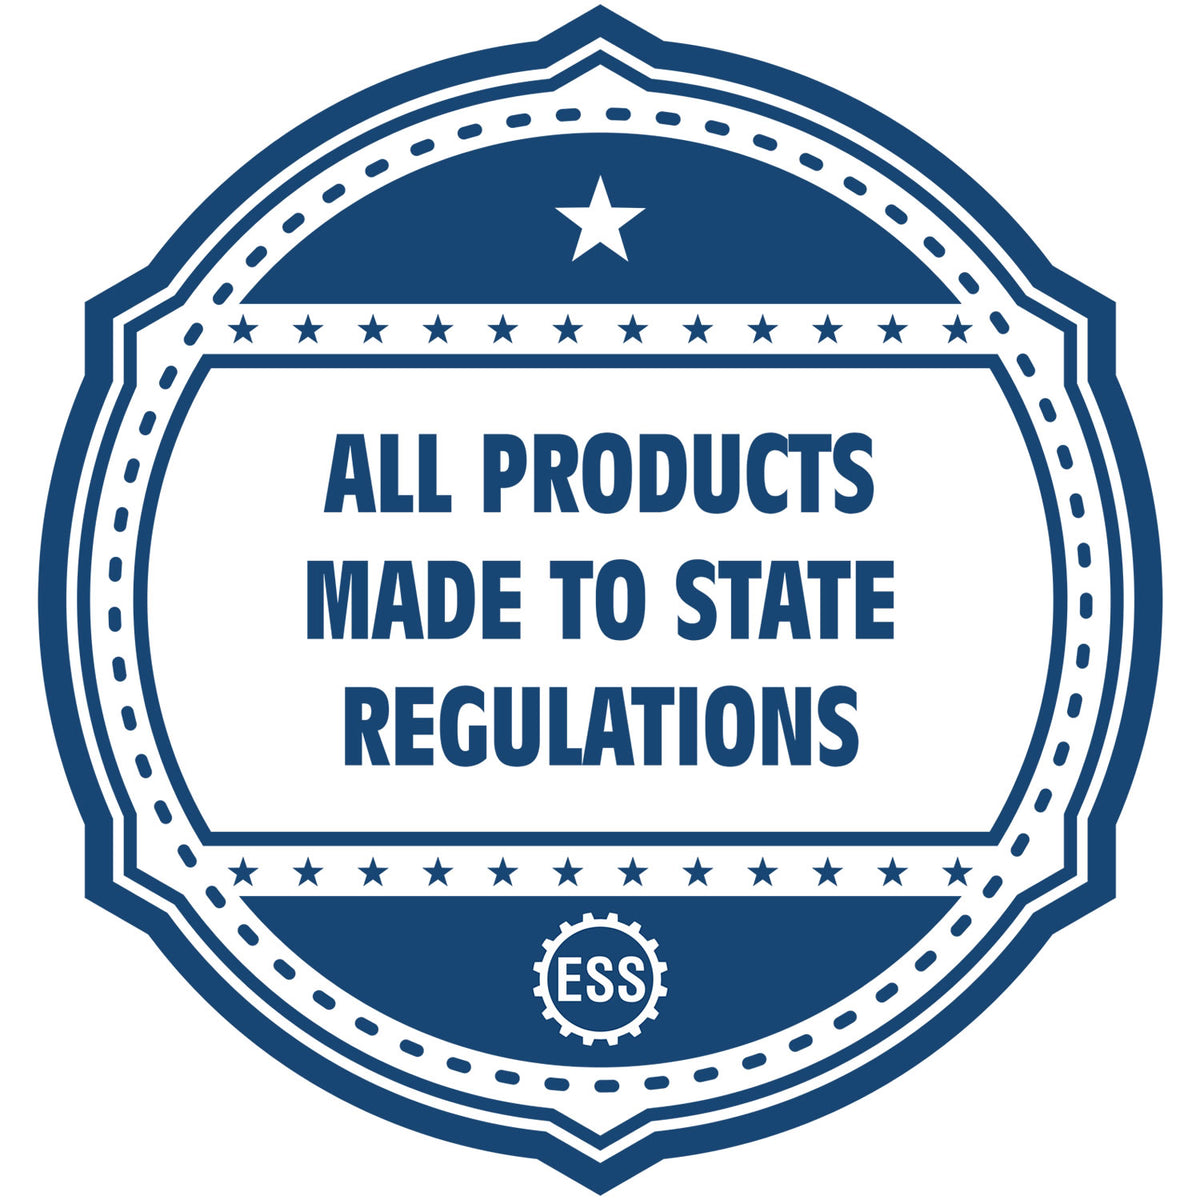 A blue icon or badge for the Gift North Carolina Engineer Seal showing that this product is made in compliance with state regulations.